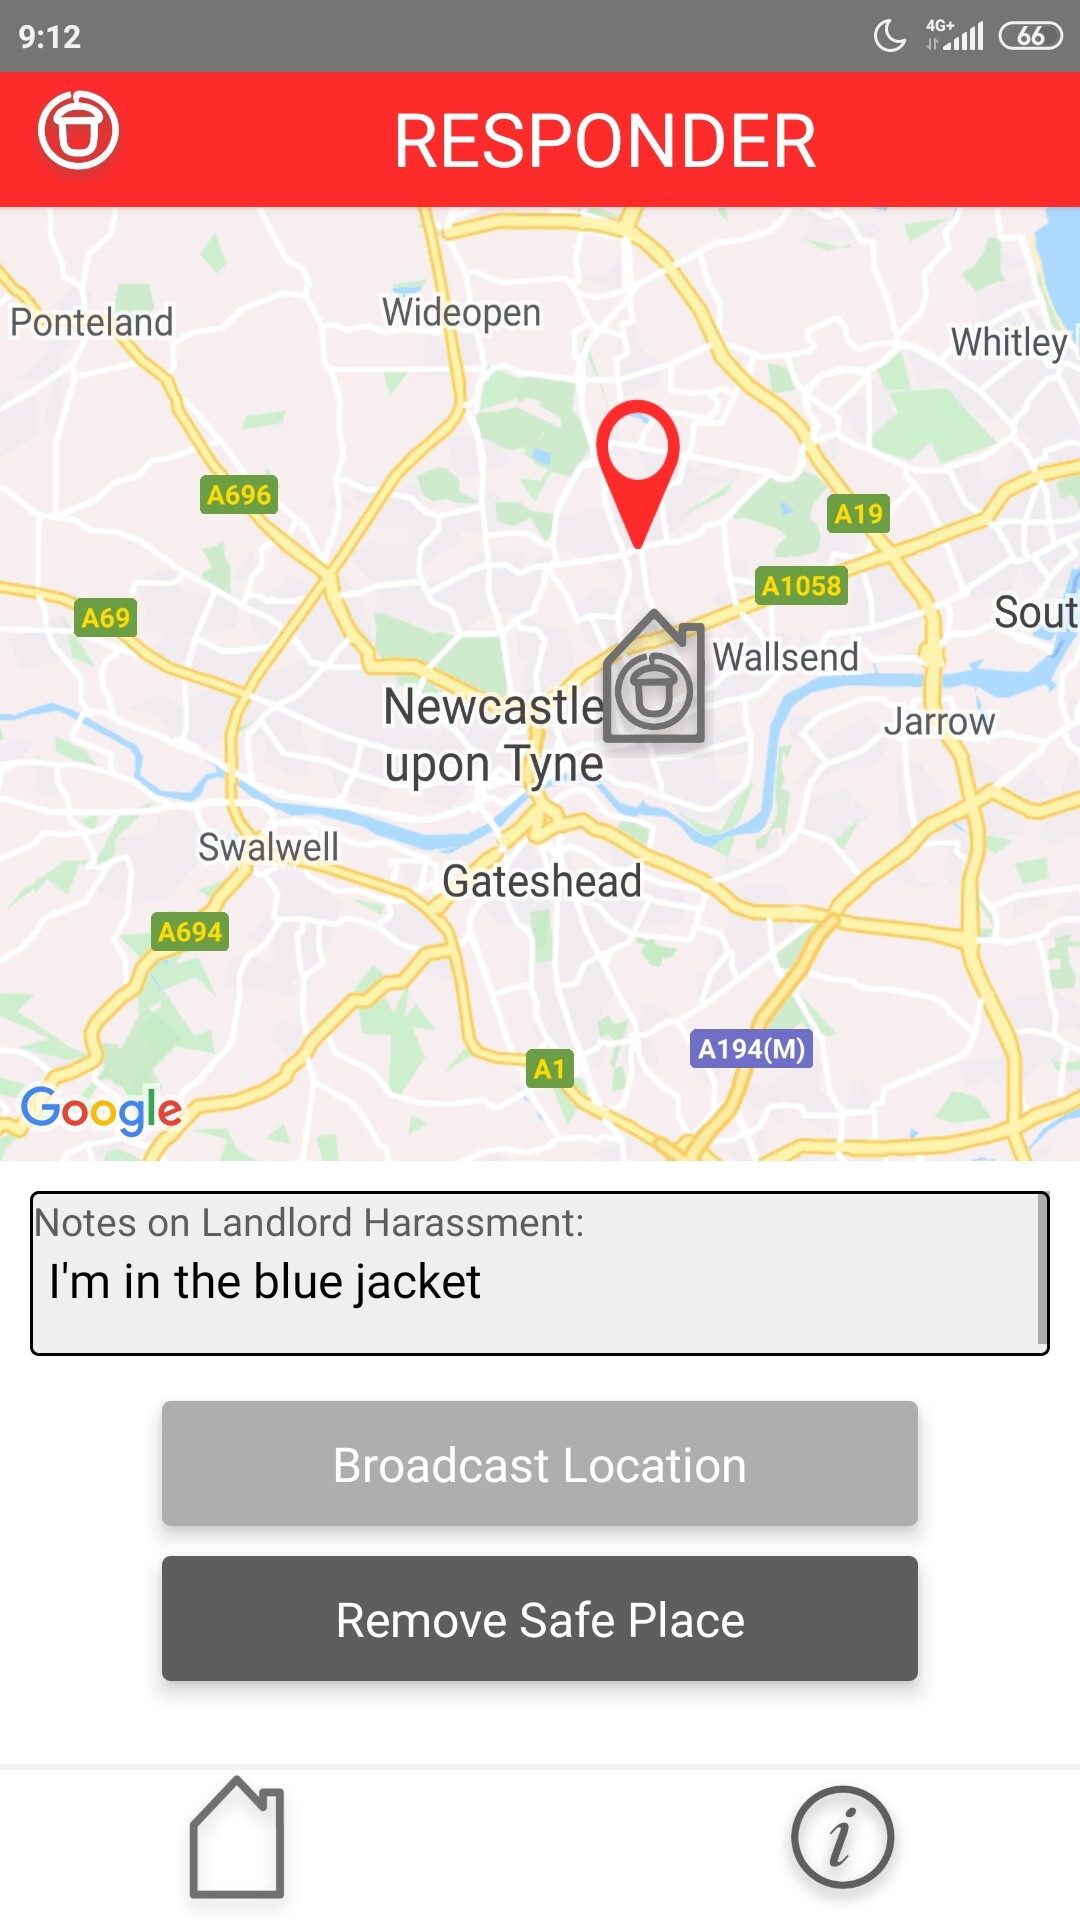 A screenshot of the app in action